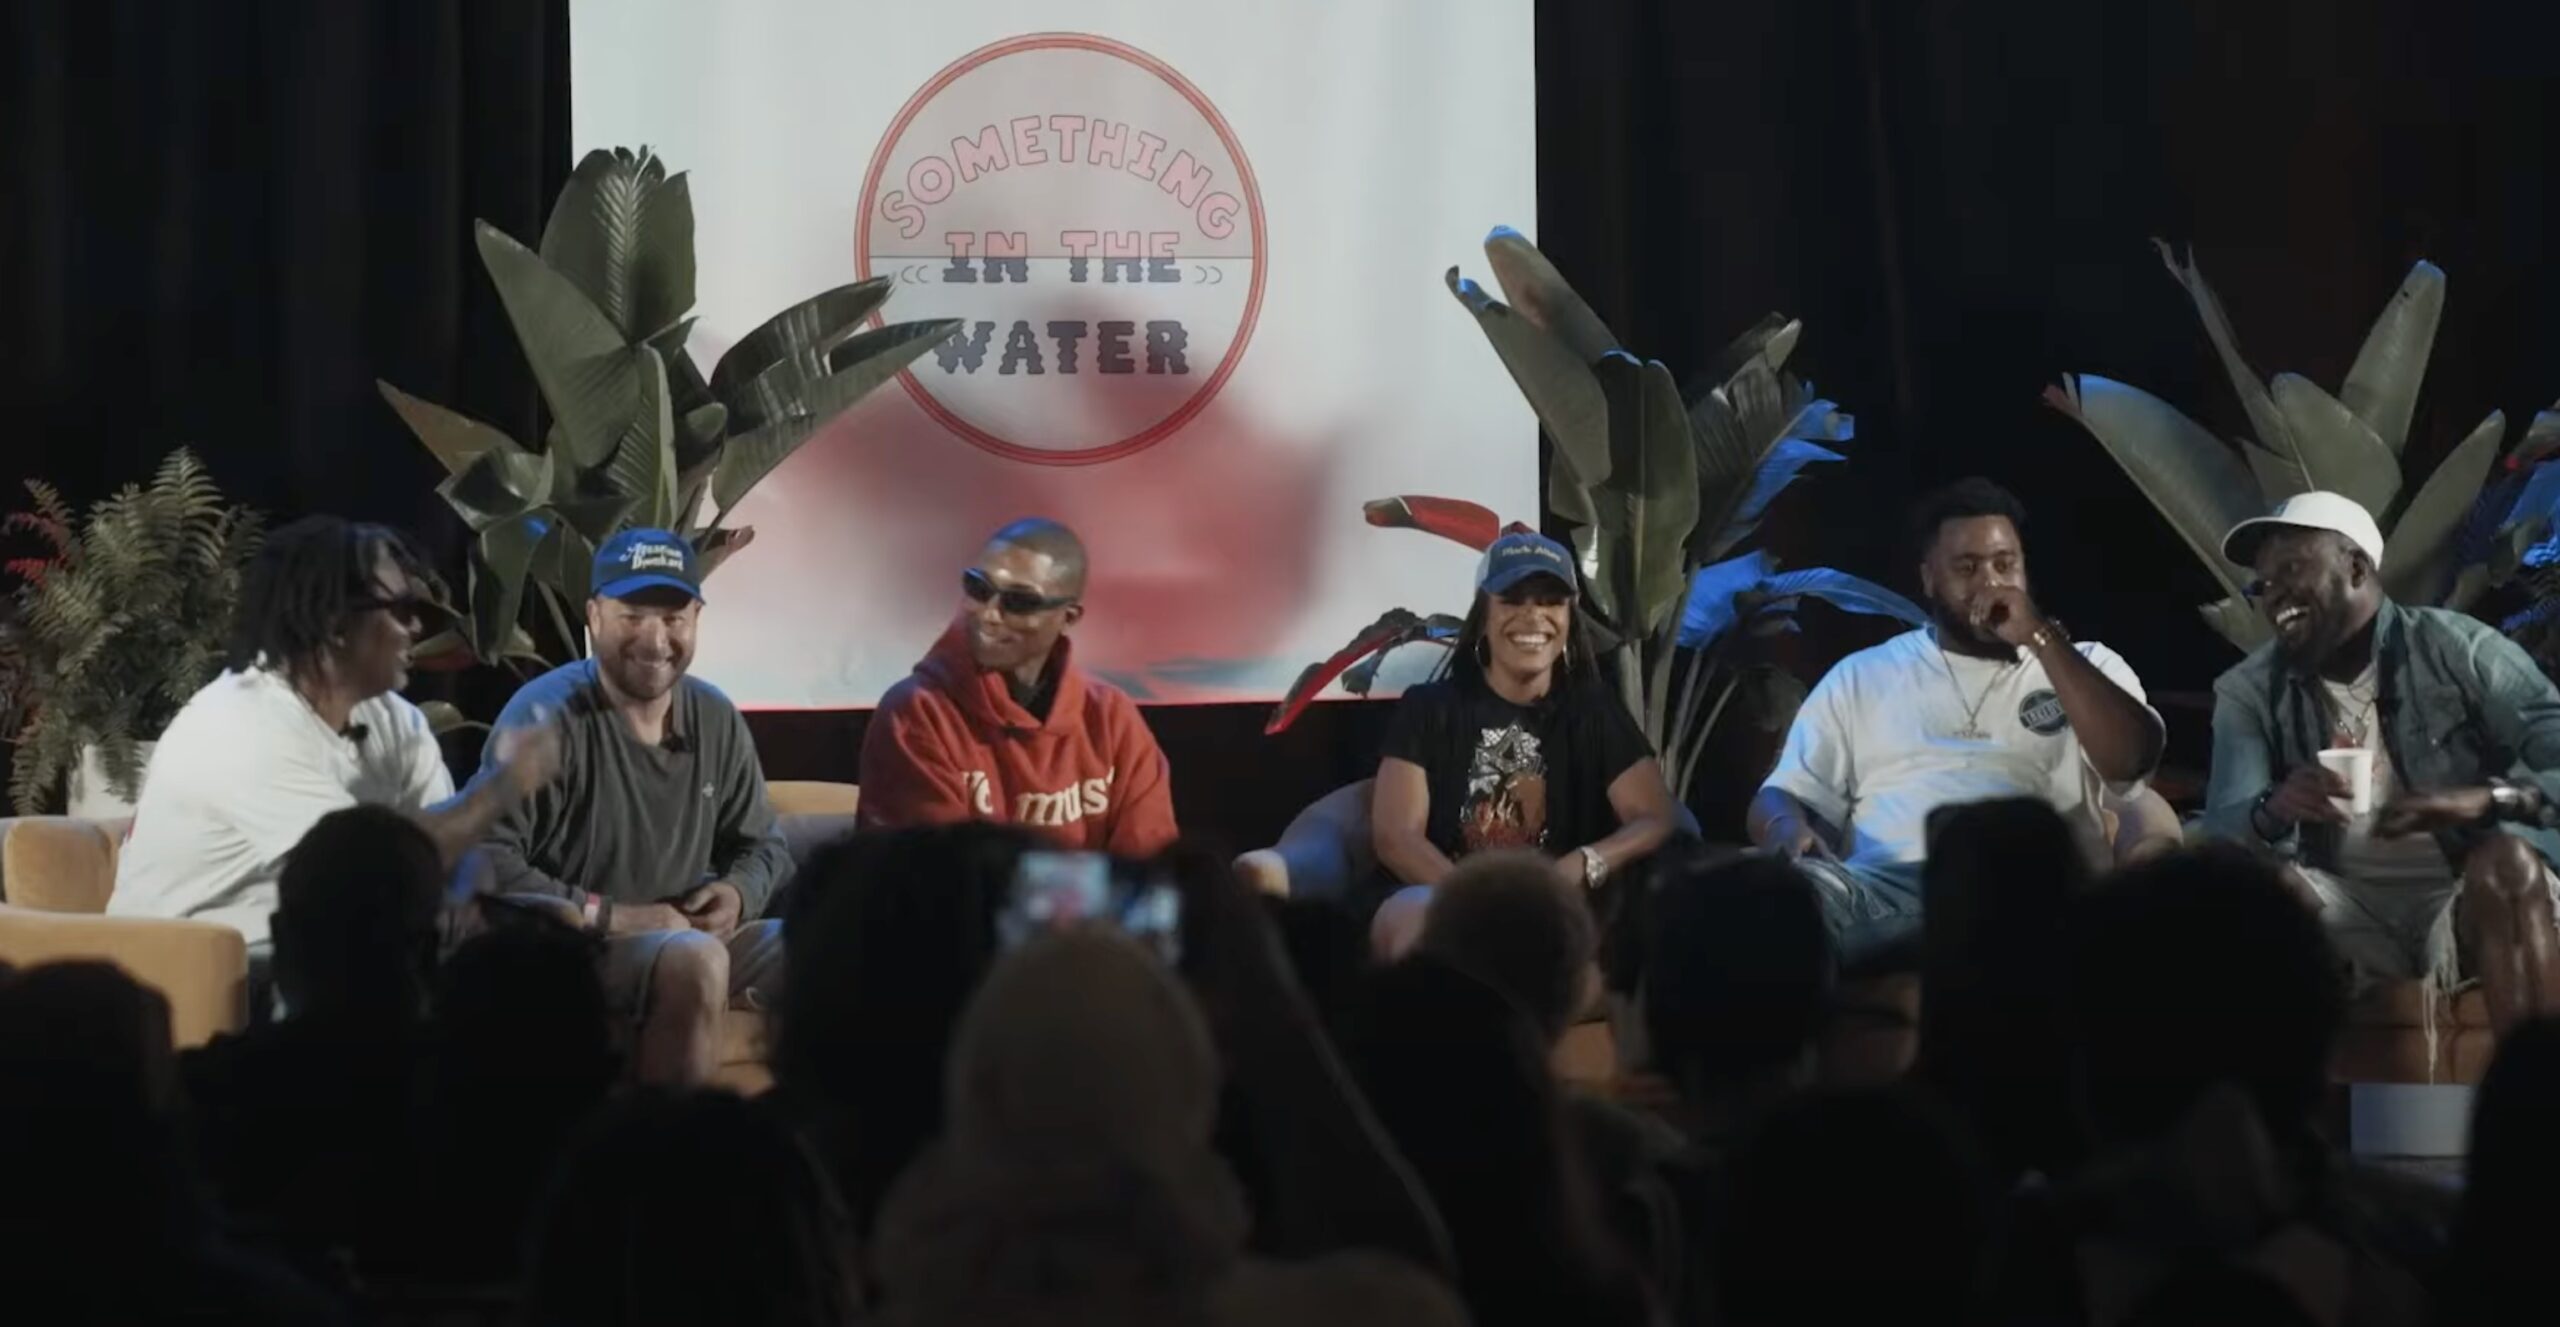 OTHERtone with Pharrell, Scott, and Fam-Lay – A Go-go Celebration with Big G, Kacey, and Lil Chris (Video)